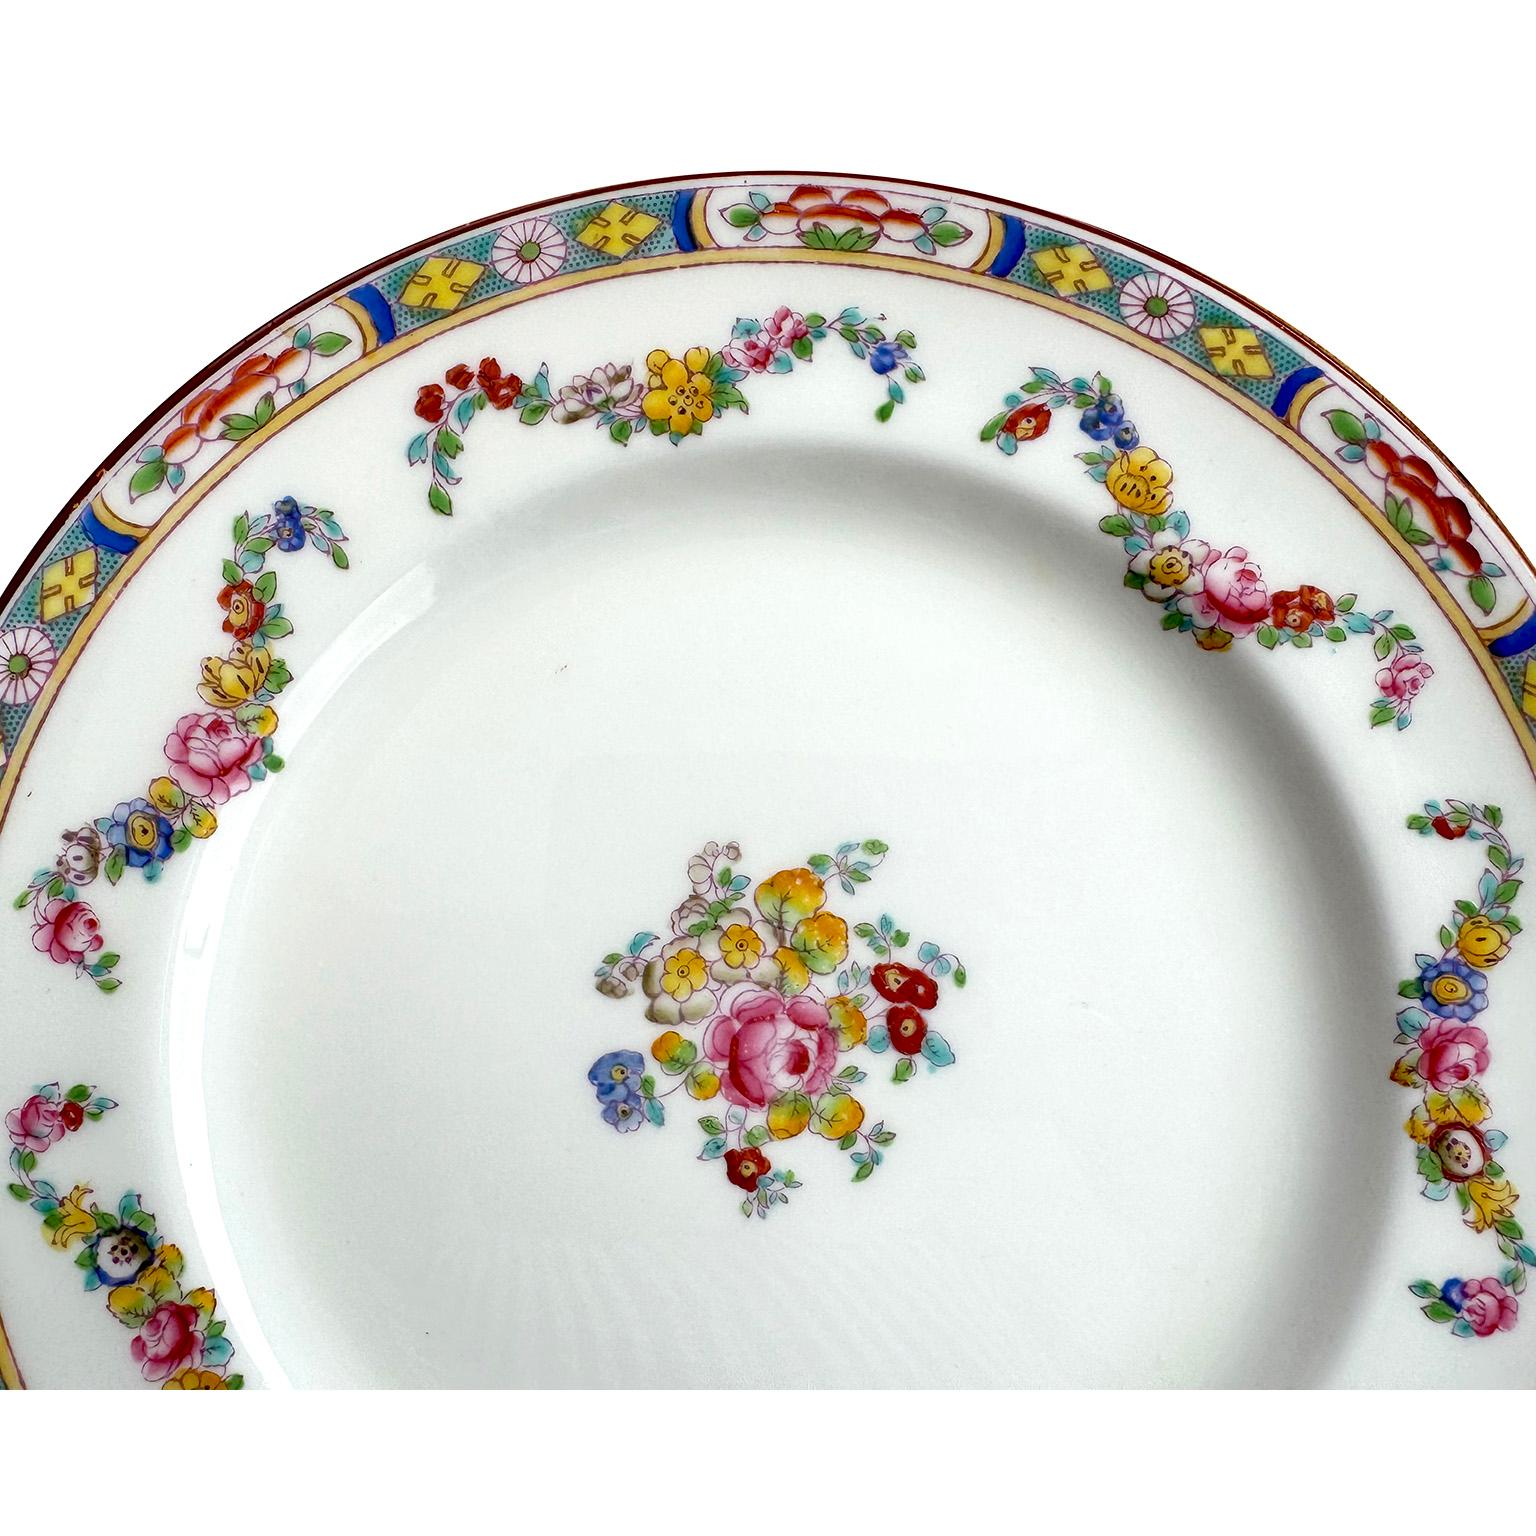 A Set of 22 English Hand-Decorated Minton Fine China Salad Plates. The beautifully vibrant color hand painted salad plates, each with a colorful floral design, an intricate trim and swaged floral strands, centered with a floral bouquet. All bearing